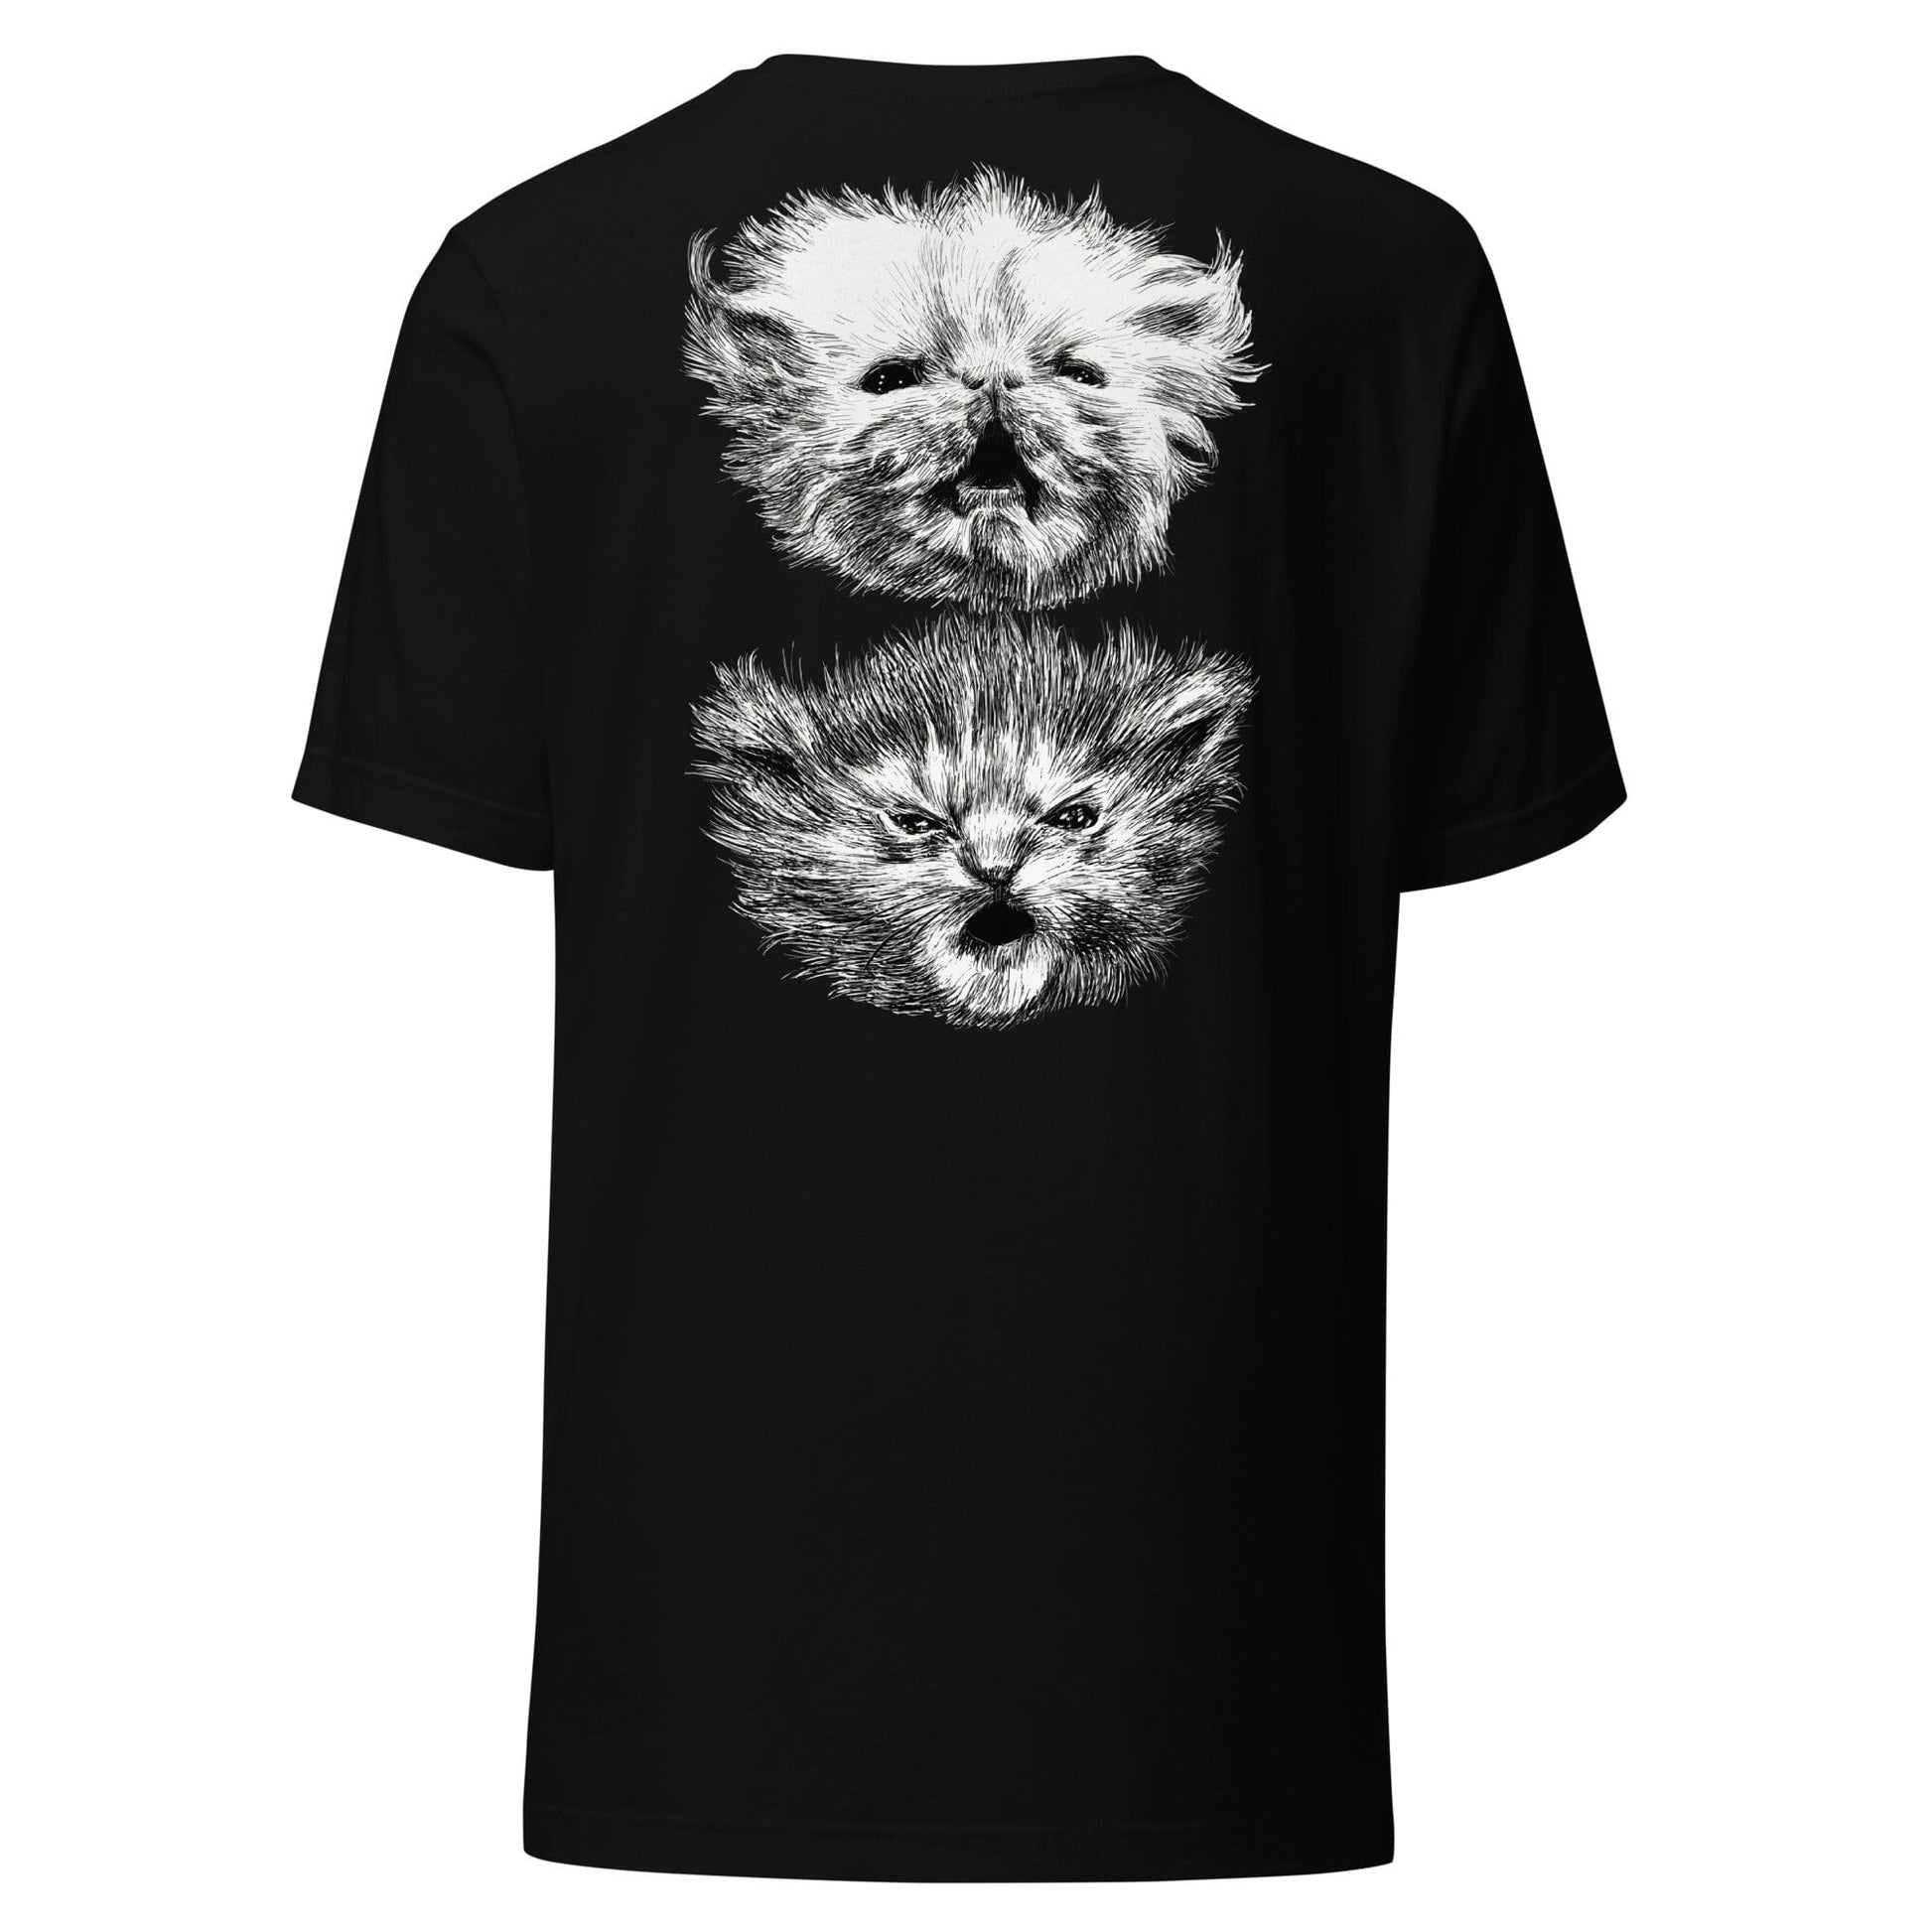 BLACK WispTot T-Shirt [Unfoiled] (All net proceeds go to equally to Kitty CrusAIDe and Rags to Riches Animal Rescue) JoyousJoyfulJoyness 